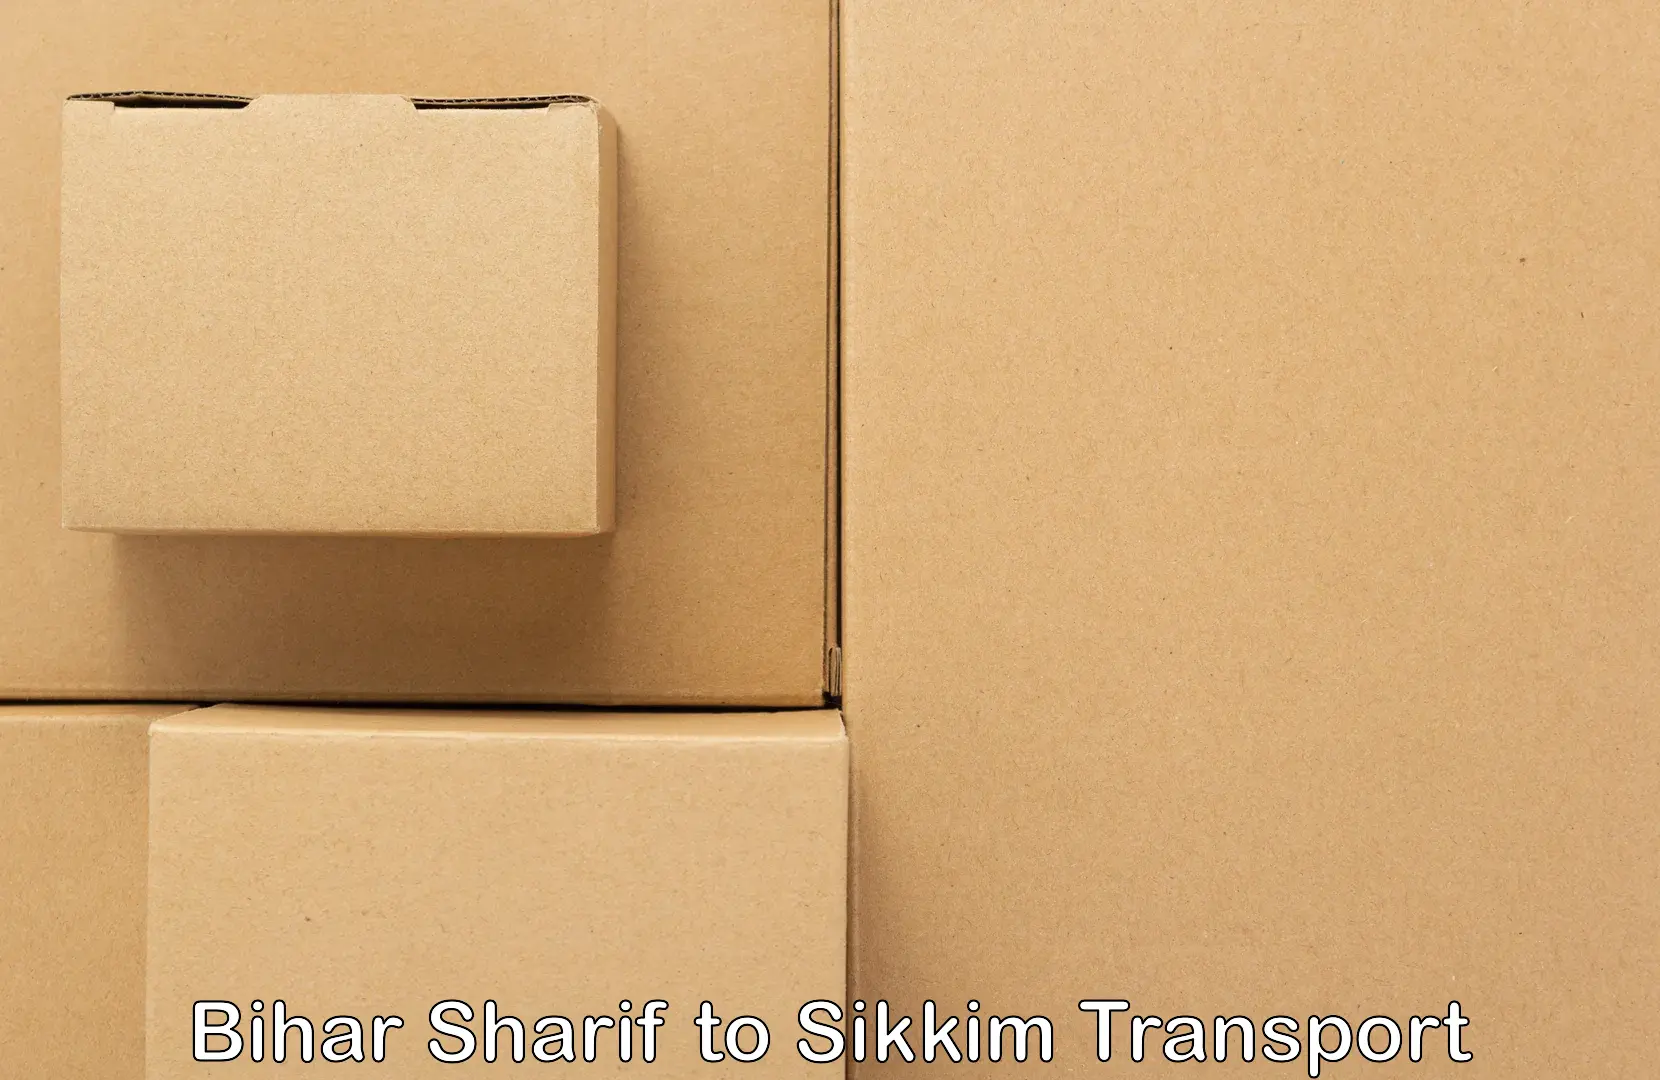 Daily parcel service transport in Bihar Sharif to Sikkim